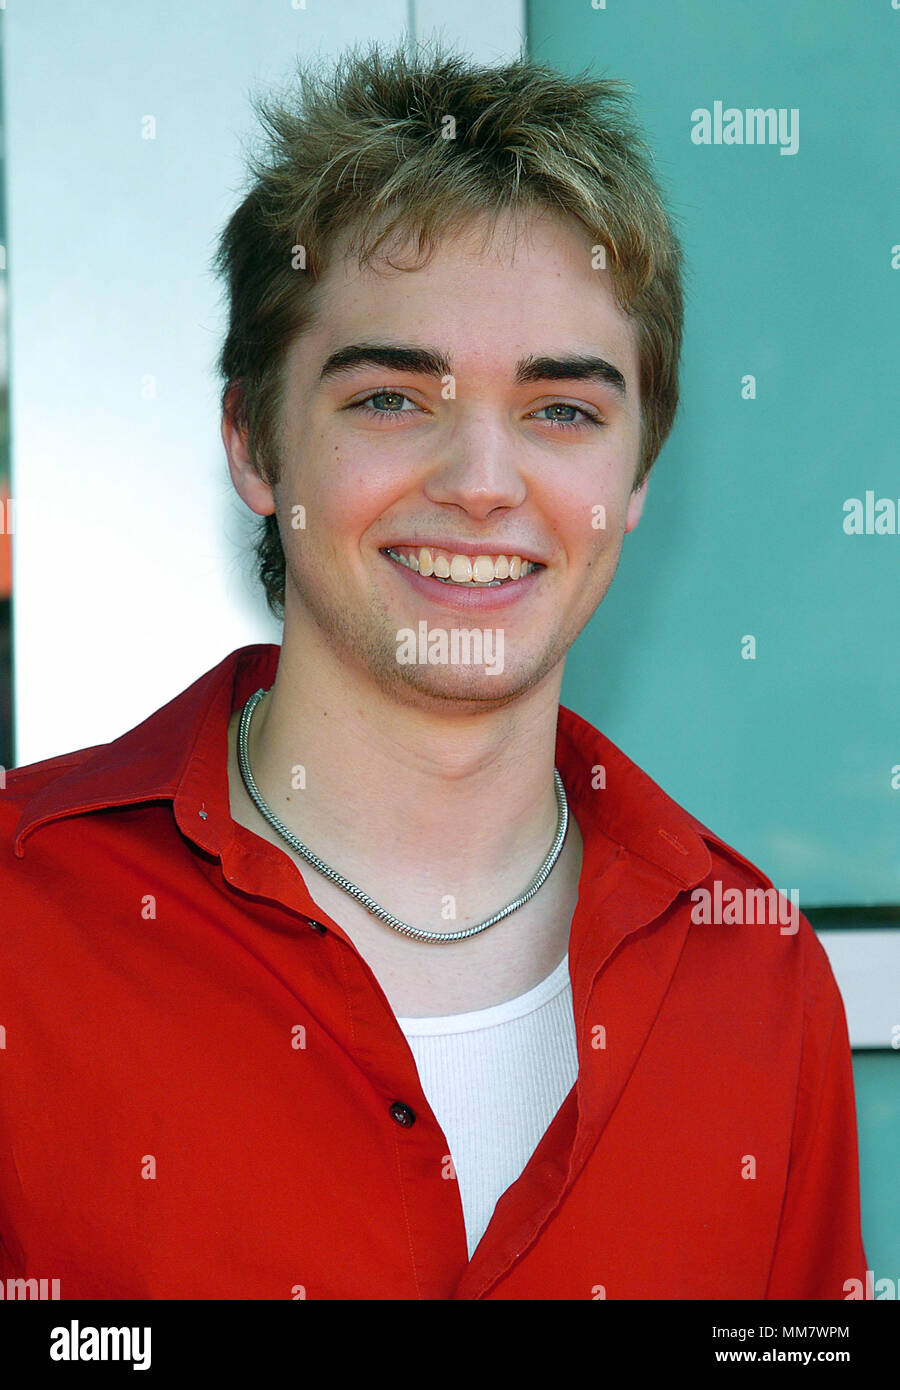 Drew Tyler Bell arriving at the Sleepover Premiere at the Arclight Theatre in Los Angeles. June 27, 2004. BellDrewTyler069 Red Carpet Event, Vertical, USA, Film Industry, Celebrities,  Photography, Bestof, Arts Culture and Entertainment, Topix Celebrities fashion /  Vertical, Best of, Event in Hollywood Life - California,  Red Carpet and backstage, USA, Film Industry, Celebrities,  movie celebrities, TV celebrities, Music celebrities, Photography, Bestof, Arts Culture and Entertainment,  Topix, headshot, vertical, one person,, from the year , 2004, inquiry tsuni@Gamma-USA.com Stock Photo